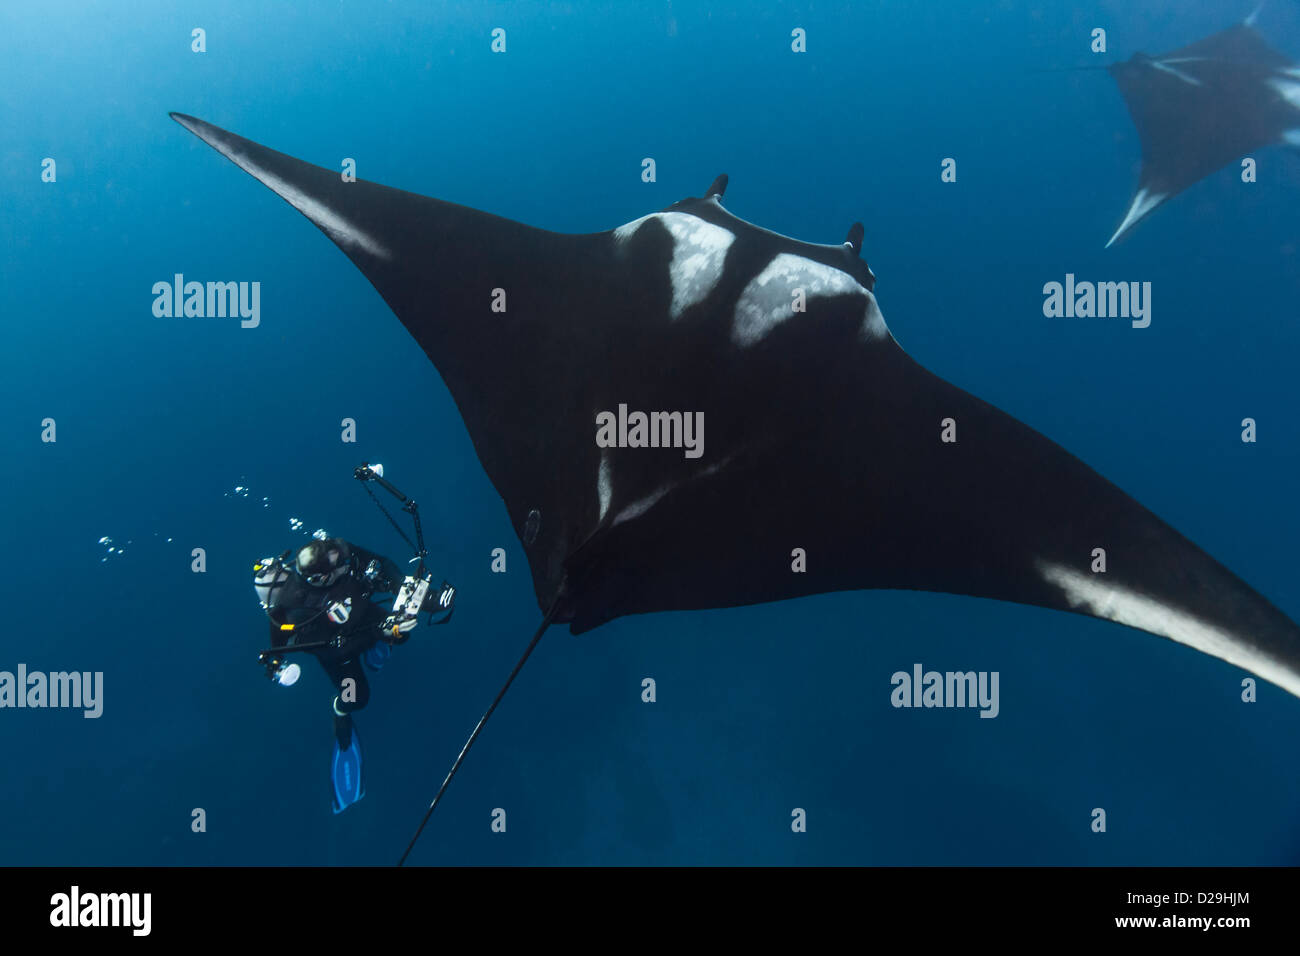 Giant oceanic manta ray being photographed in the water off of Archipielago de Revillagigedo, Mexico Punta Tosca divesite Stock Photo